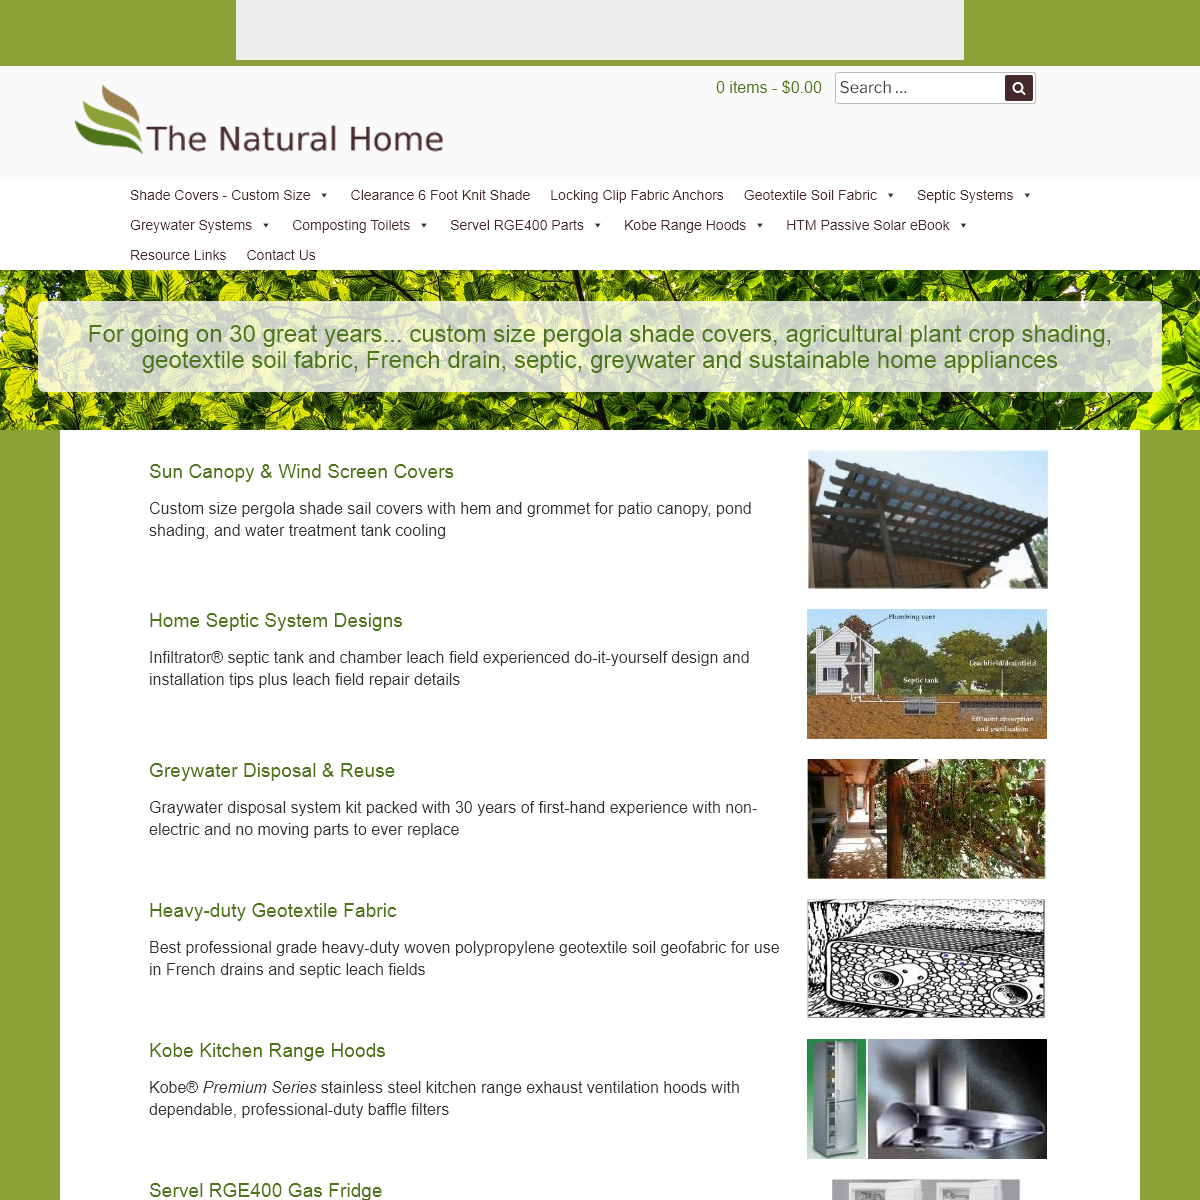 A complete backup of thenaturalhome.com